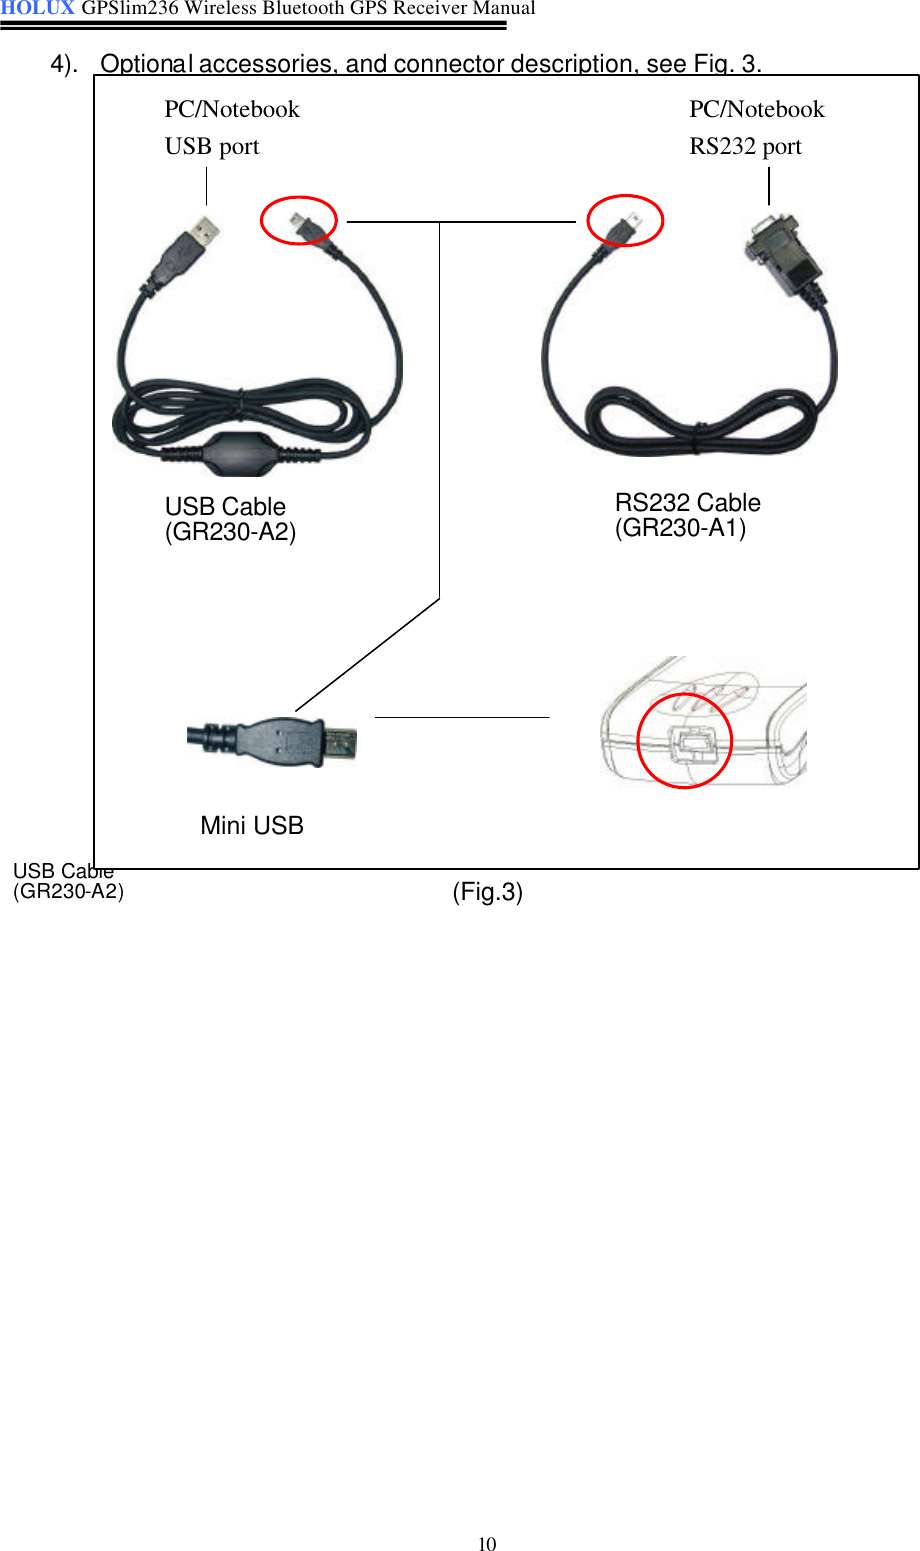 HOLUX GPSlim236 Wireless Bluetooth GPS Receiver Manual   10 4). Optional accessories, and connector description, see Fig. 3.                                 (Fig.3) USB Cable (GR230-A2)       USB Cable (GR230-A2)  RS232 Cable (GR230-A1)  Mini USB  PC/NotebookUSB port PC/Notebook RS232 port 